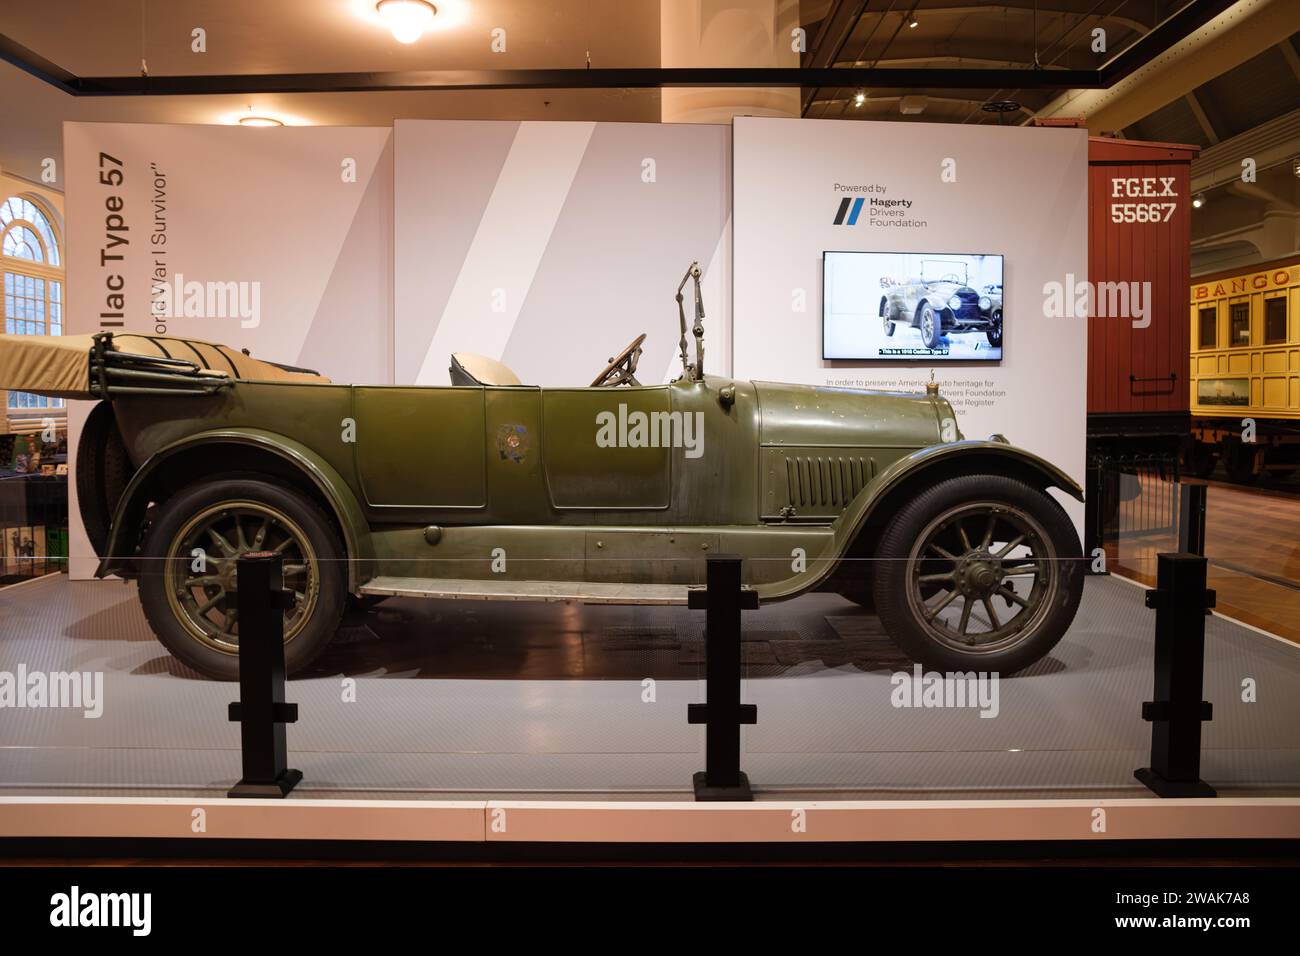 1918 Cadillac Type 57 on display at The Henry Ford Museum of American Innovation, Dearborn Michigan USA Stock Photo